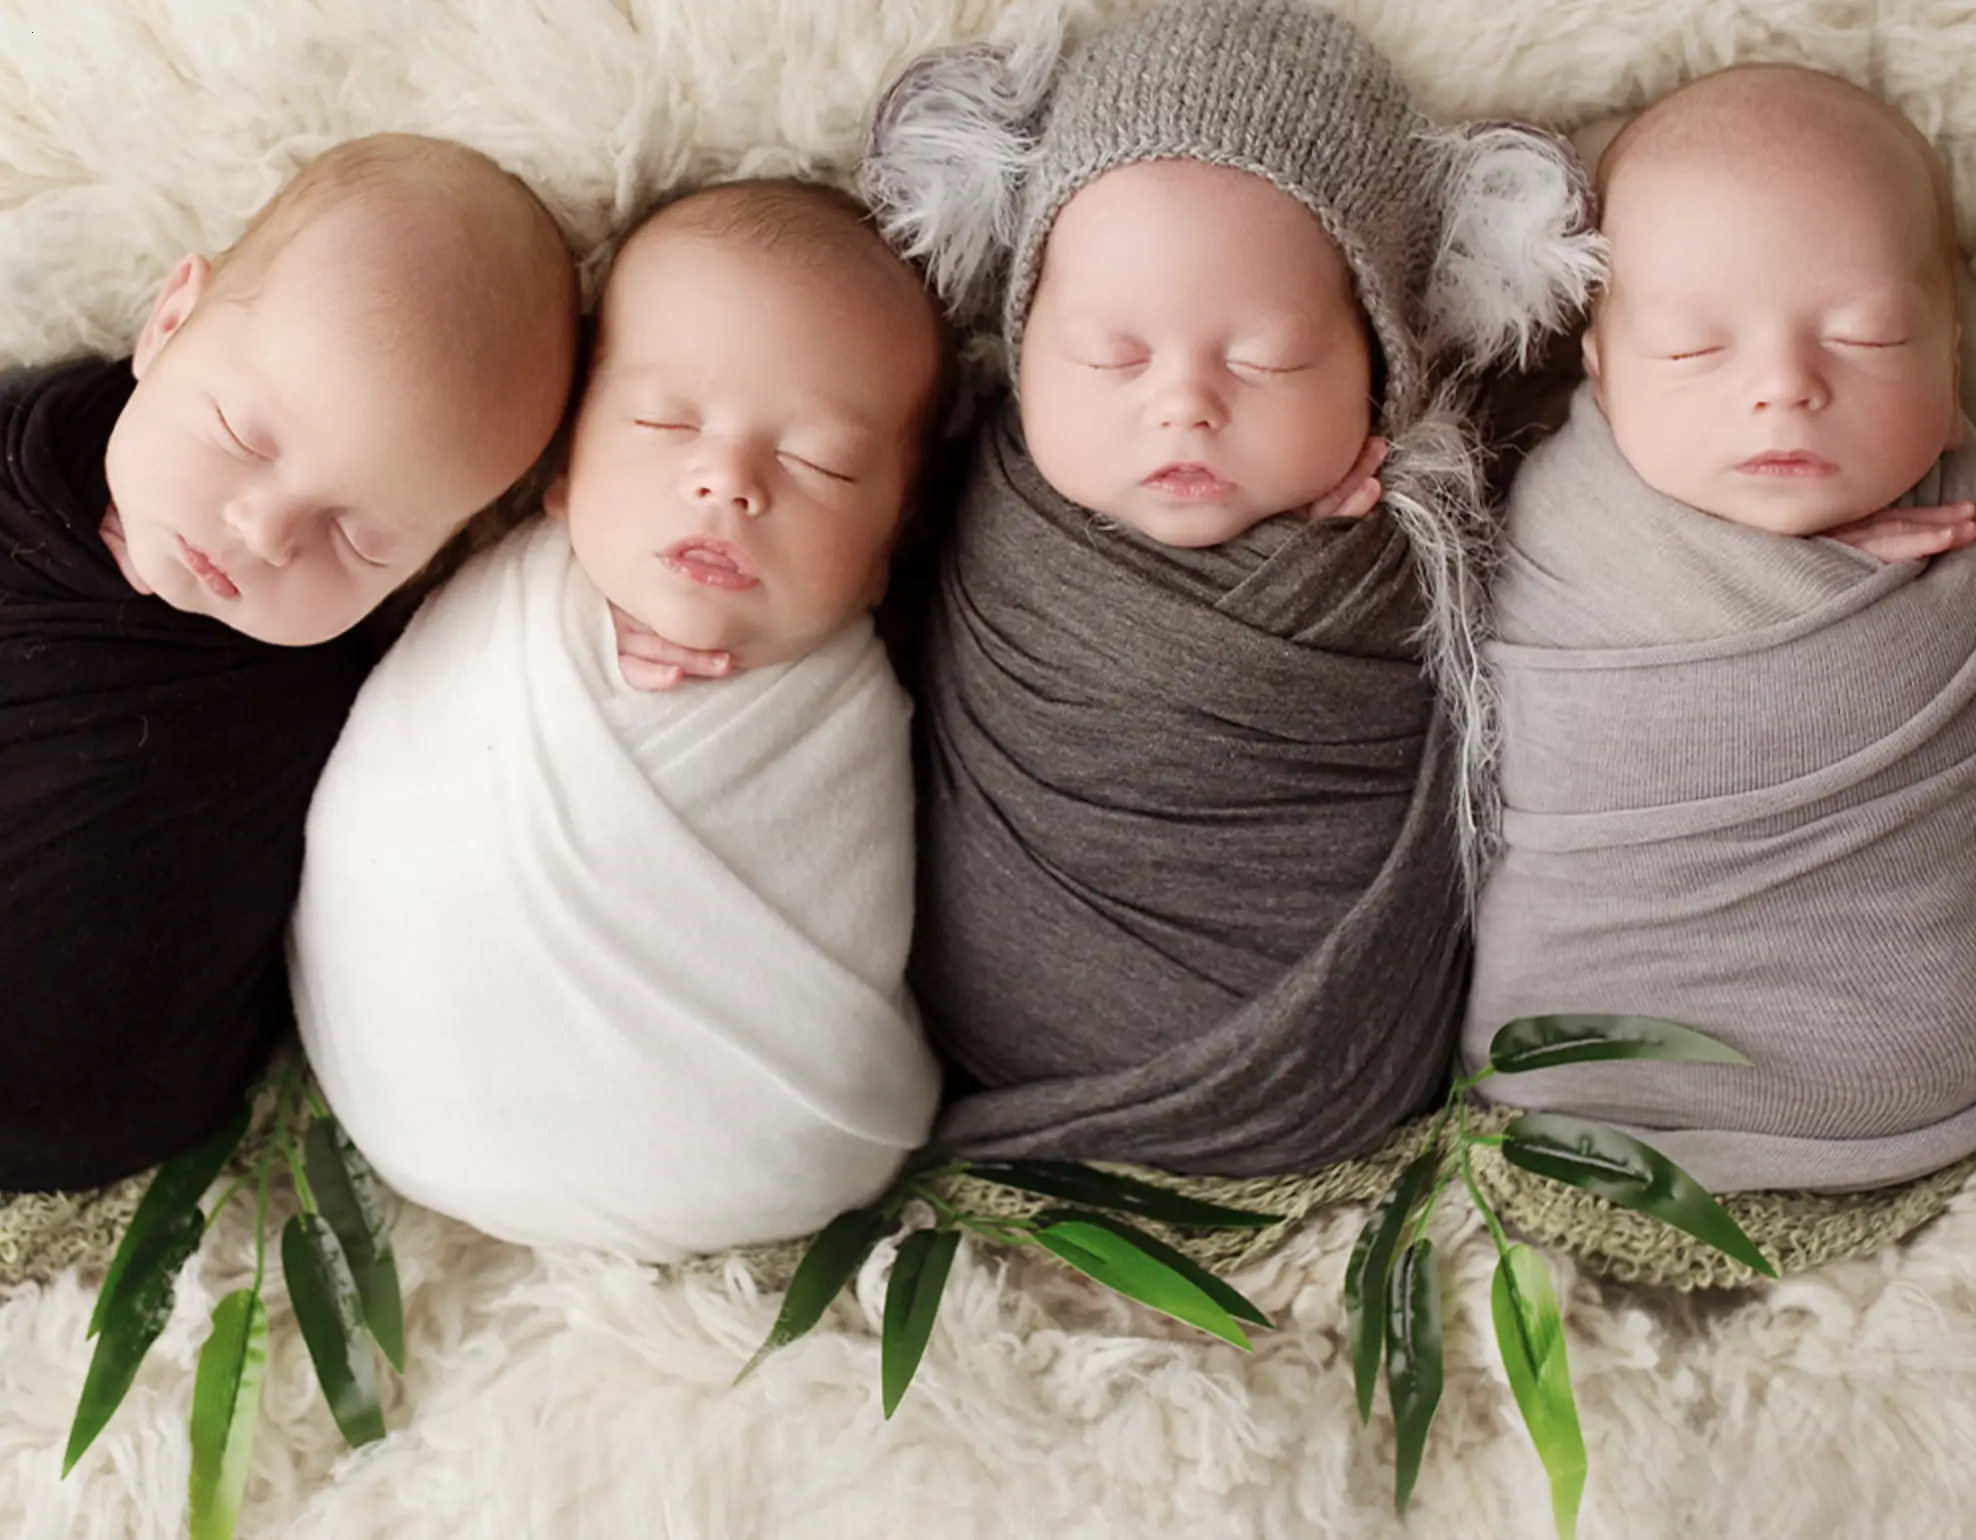 Joyful Arrival: Newborn Photos Welcoming 4 New Family Members Elicit Happiness and Thousands of Congratulations from the Community